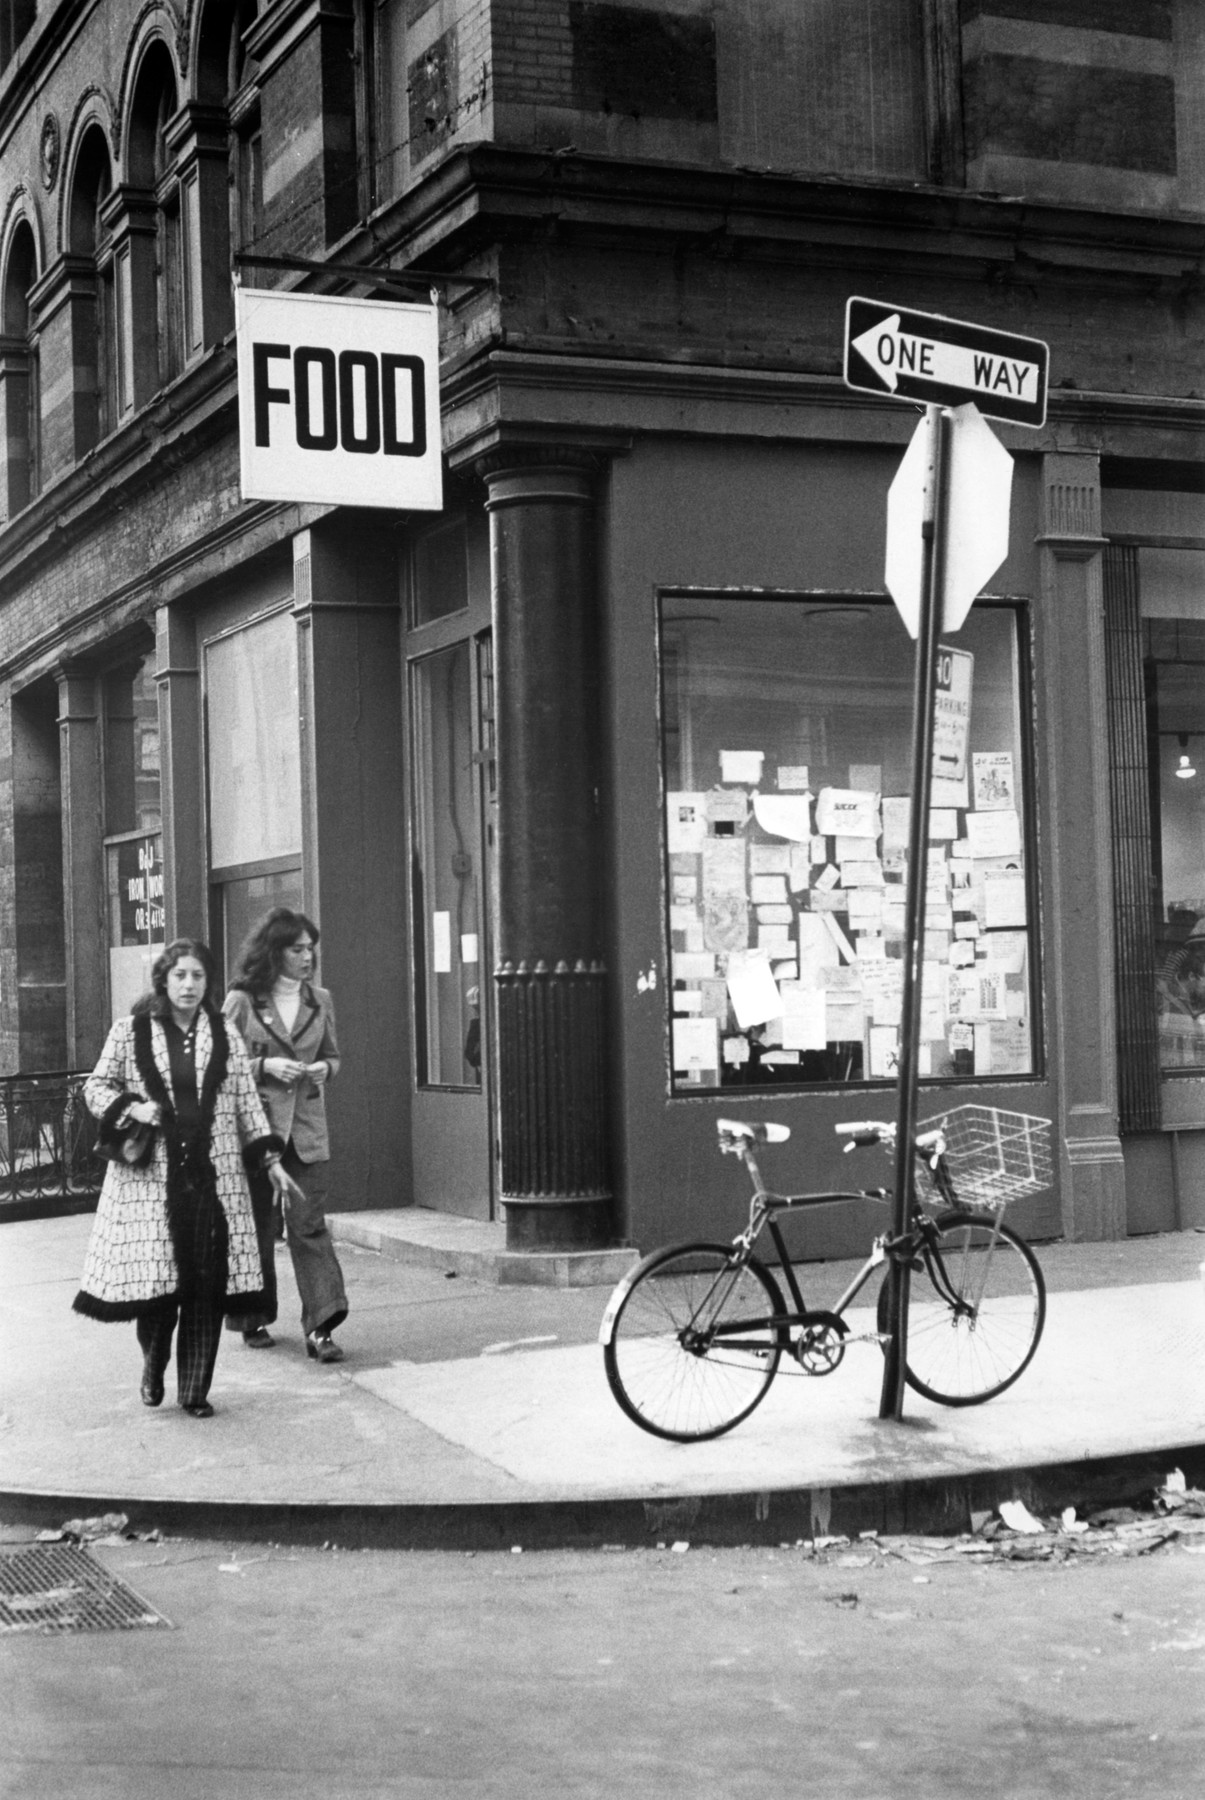 FOOD, The corner of Prince and Wooster Streets in 1972